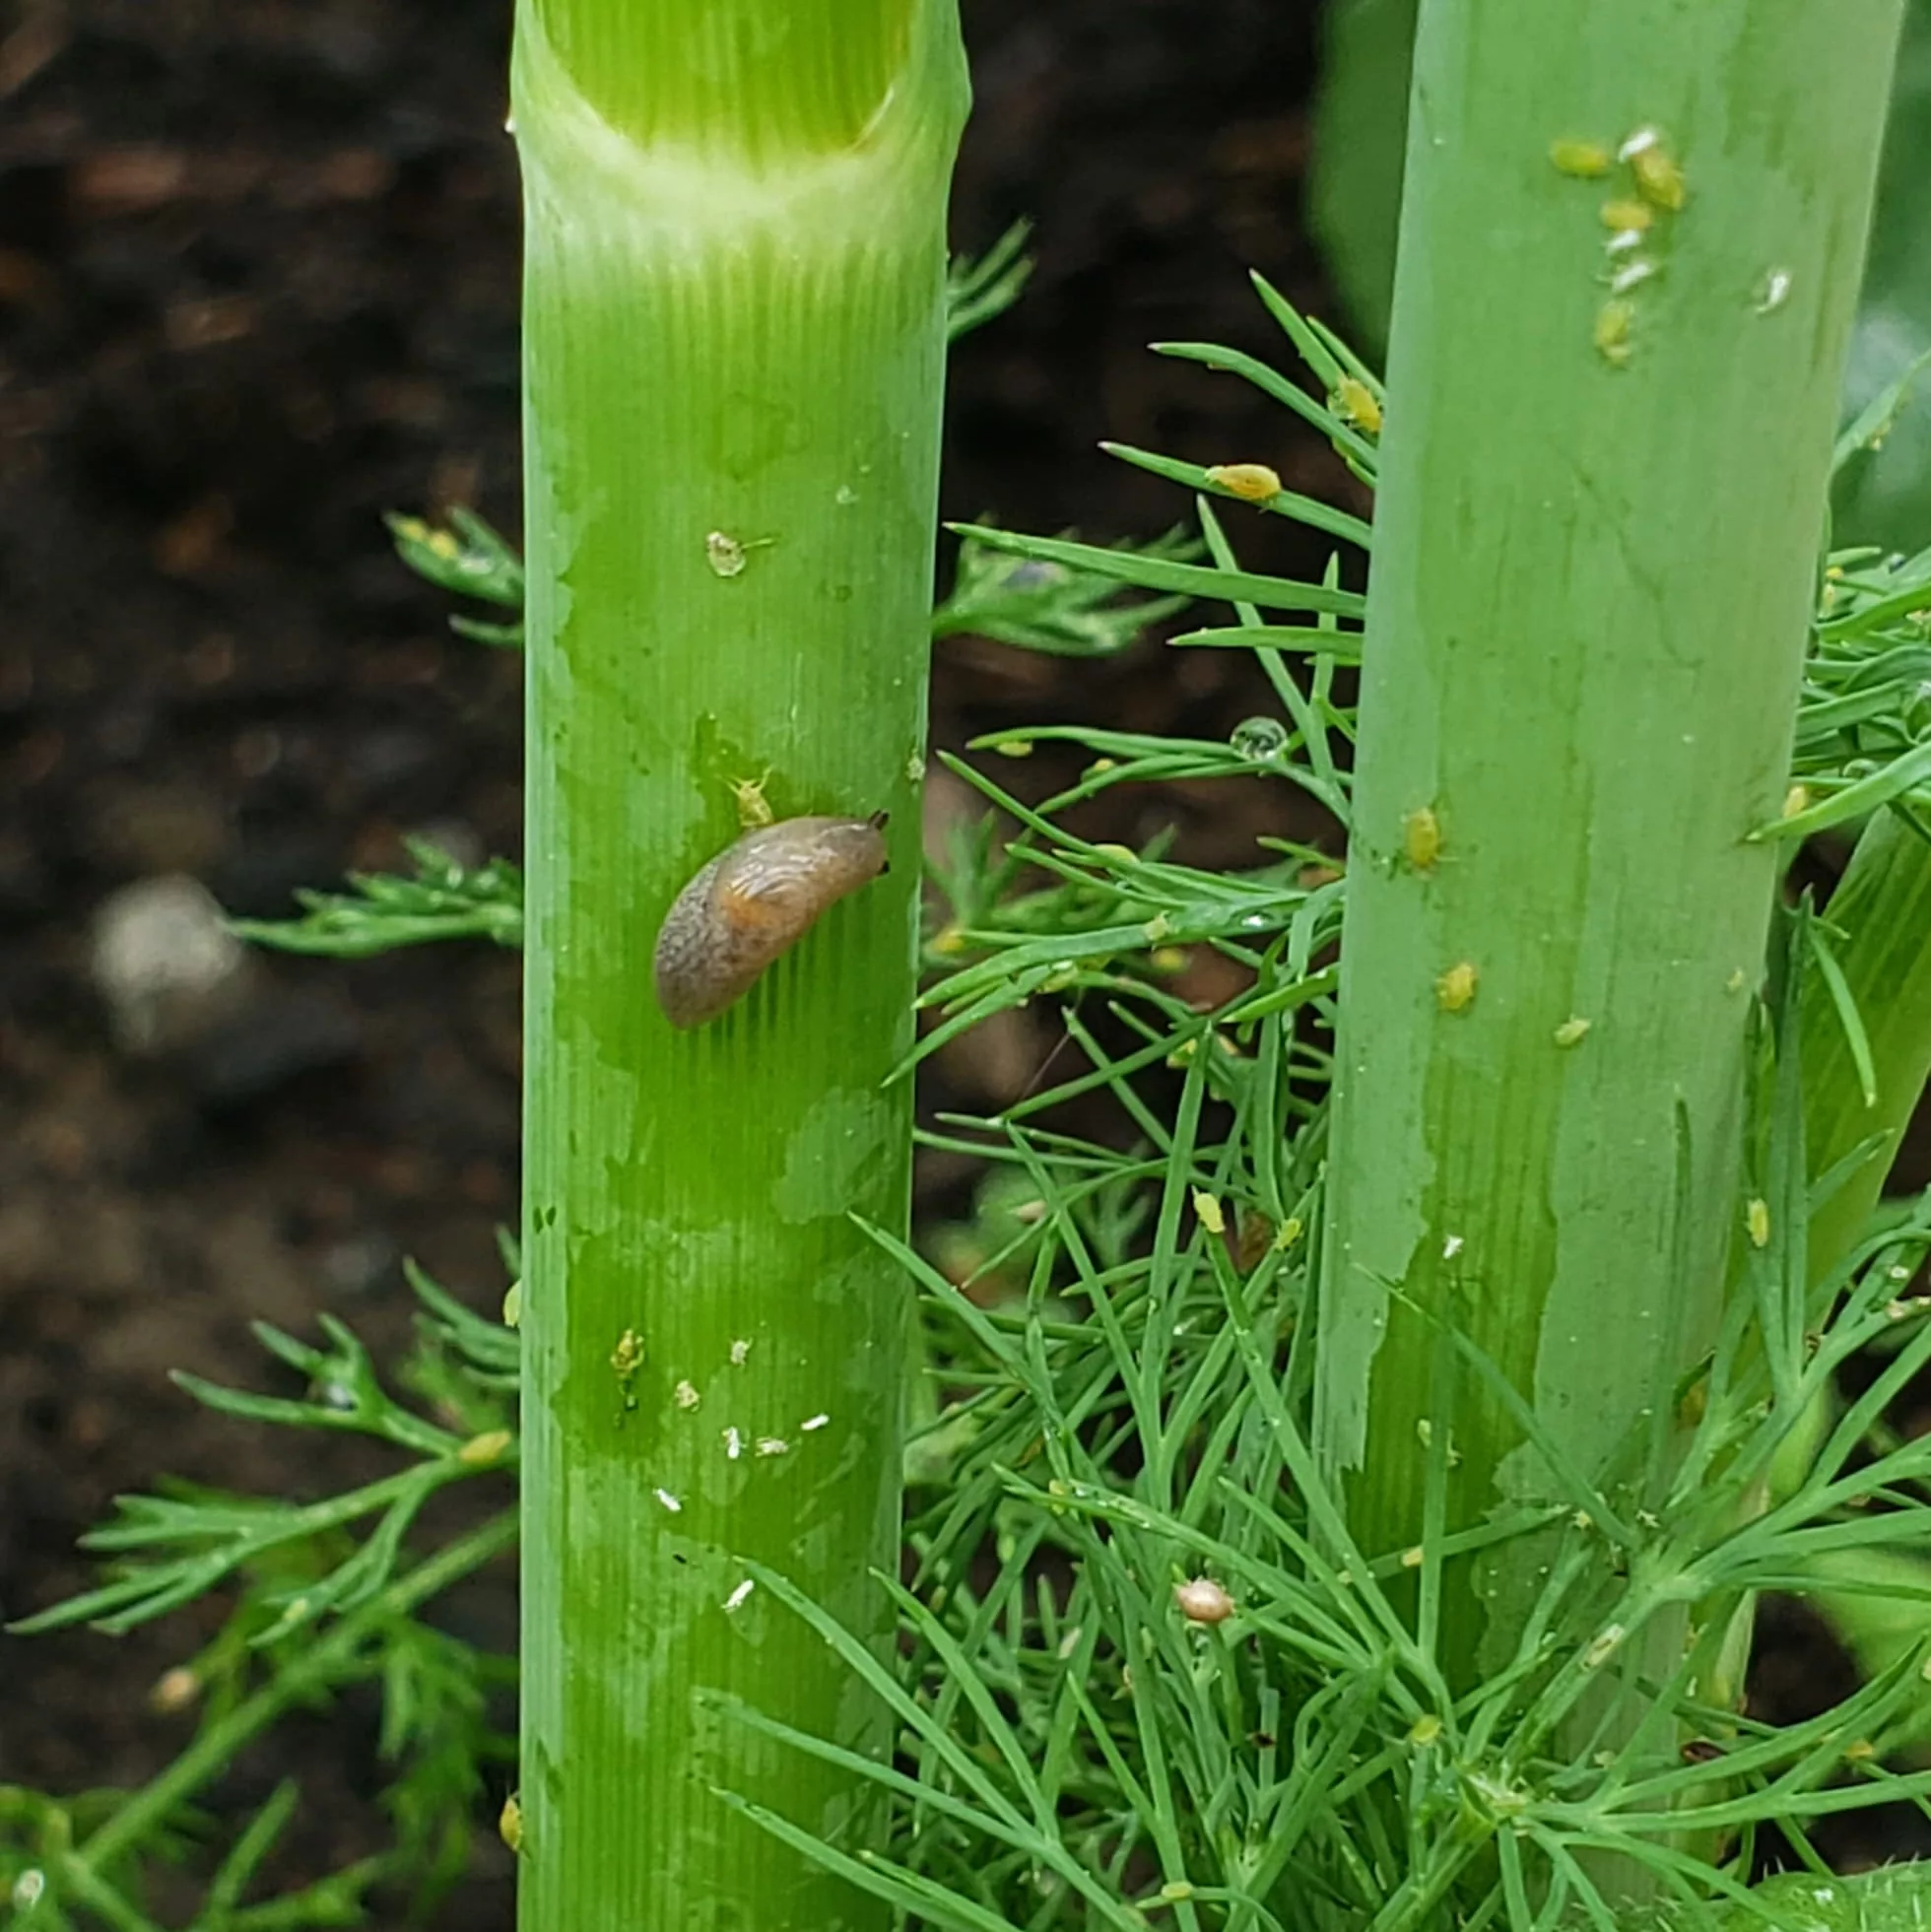 A slug and aphids on a dill plant